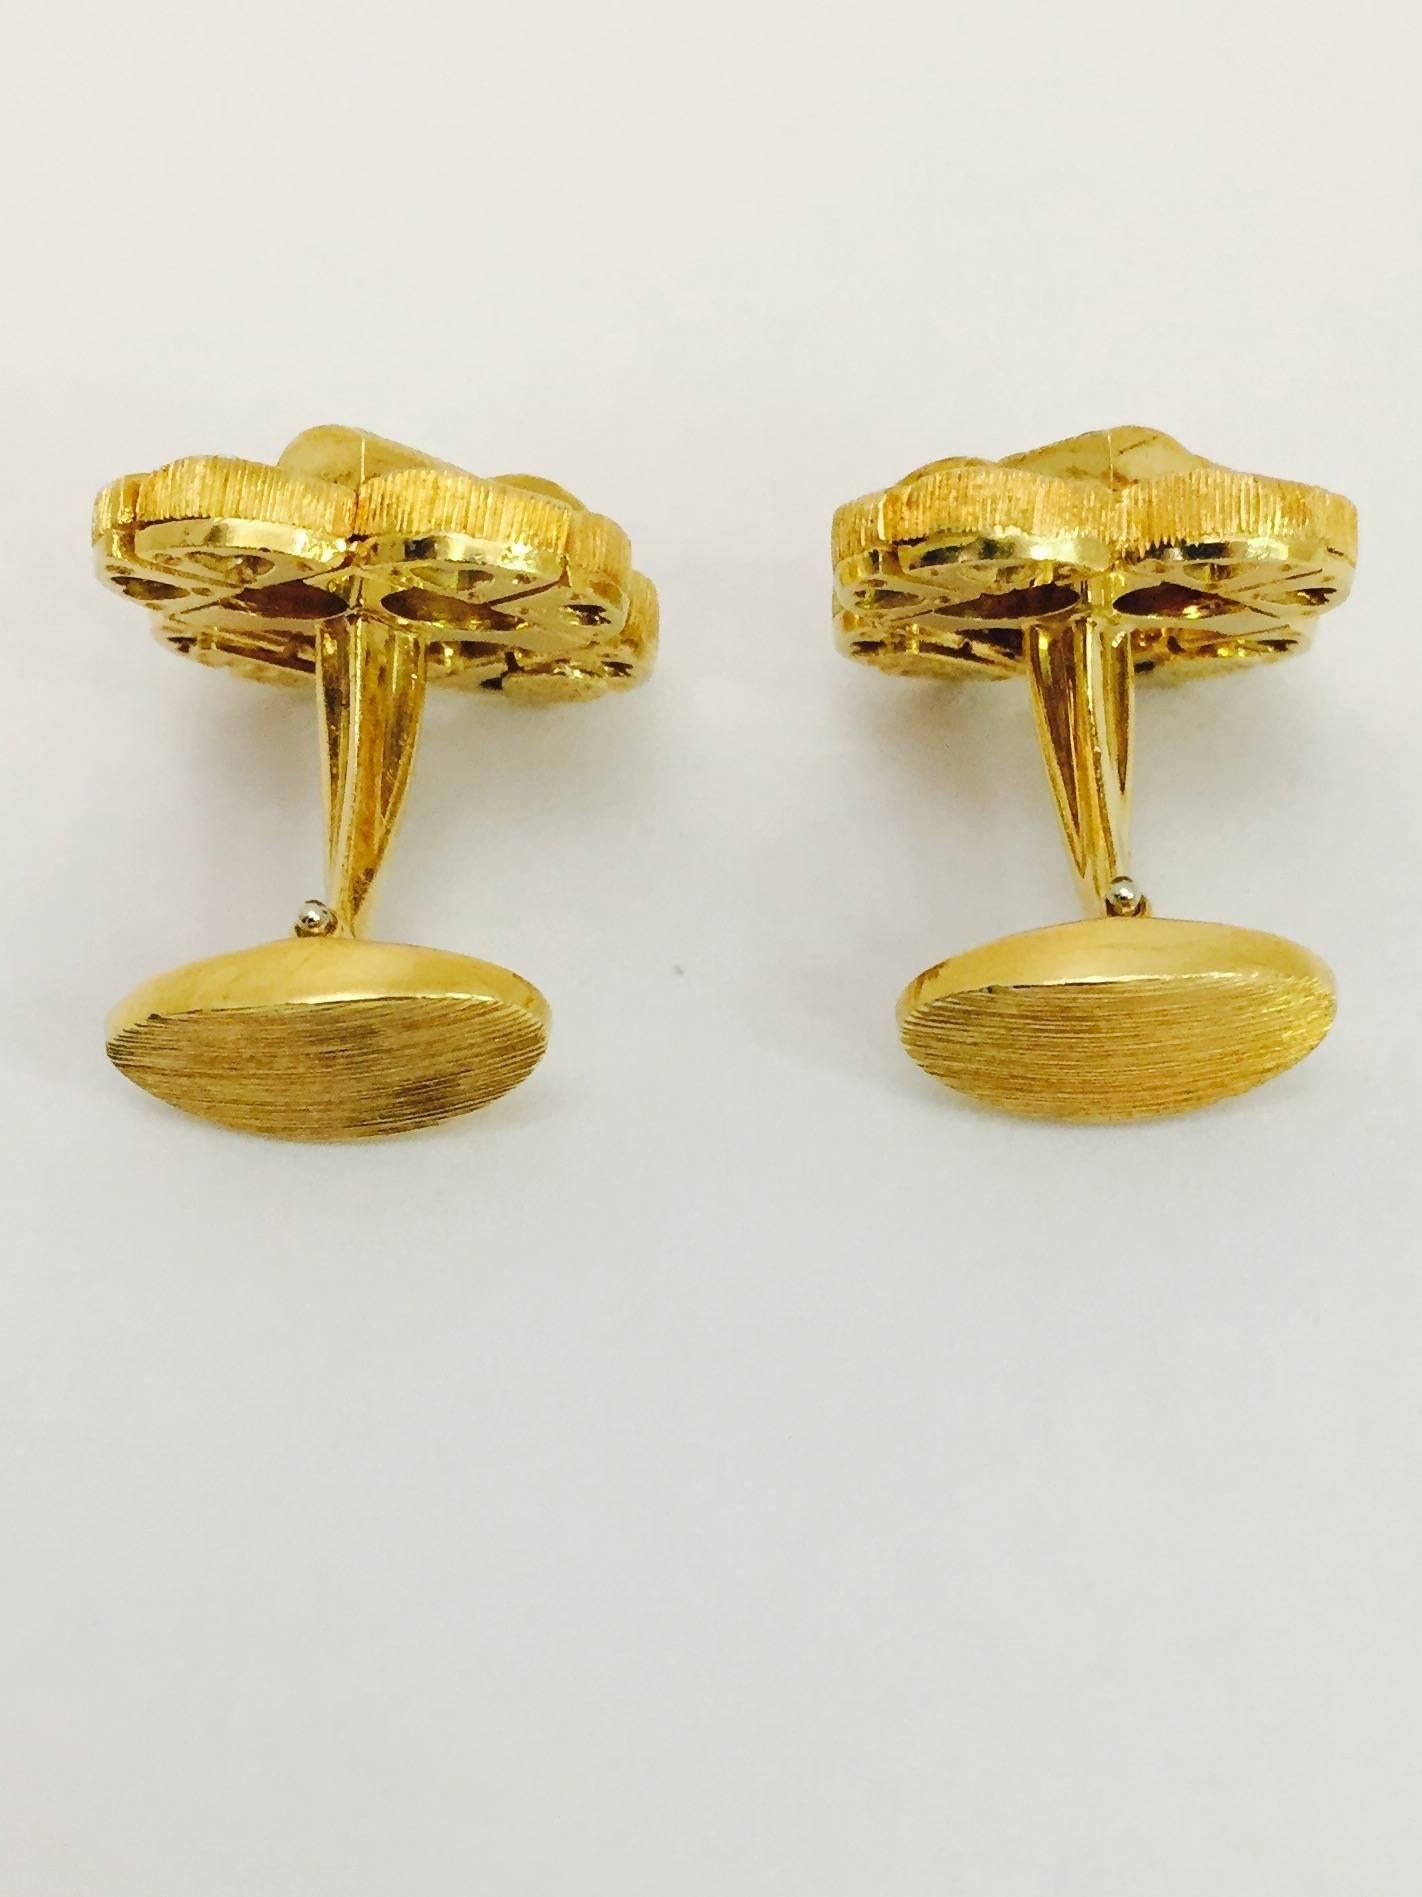 Contemporary Handsome Henry Dunay Gold Woven Cufflinks